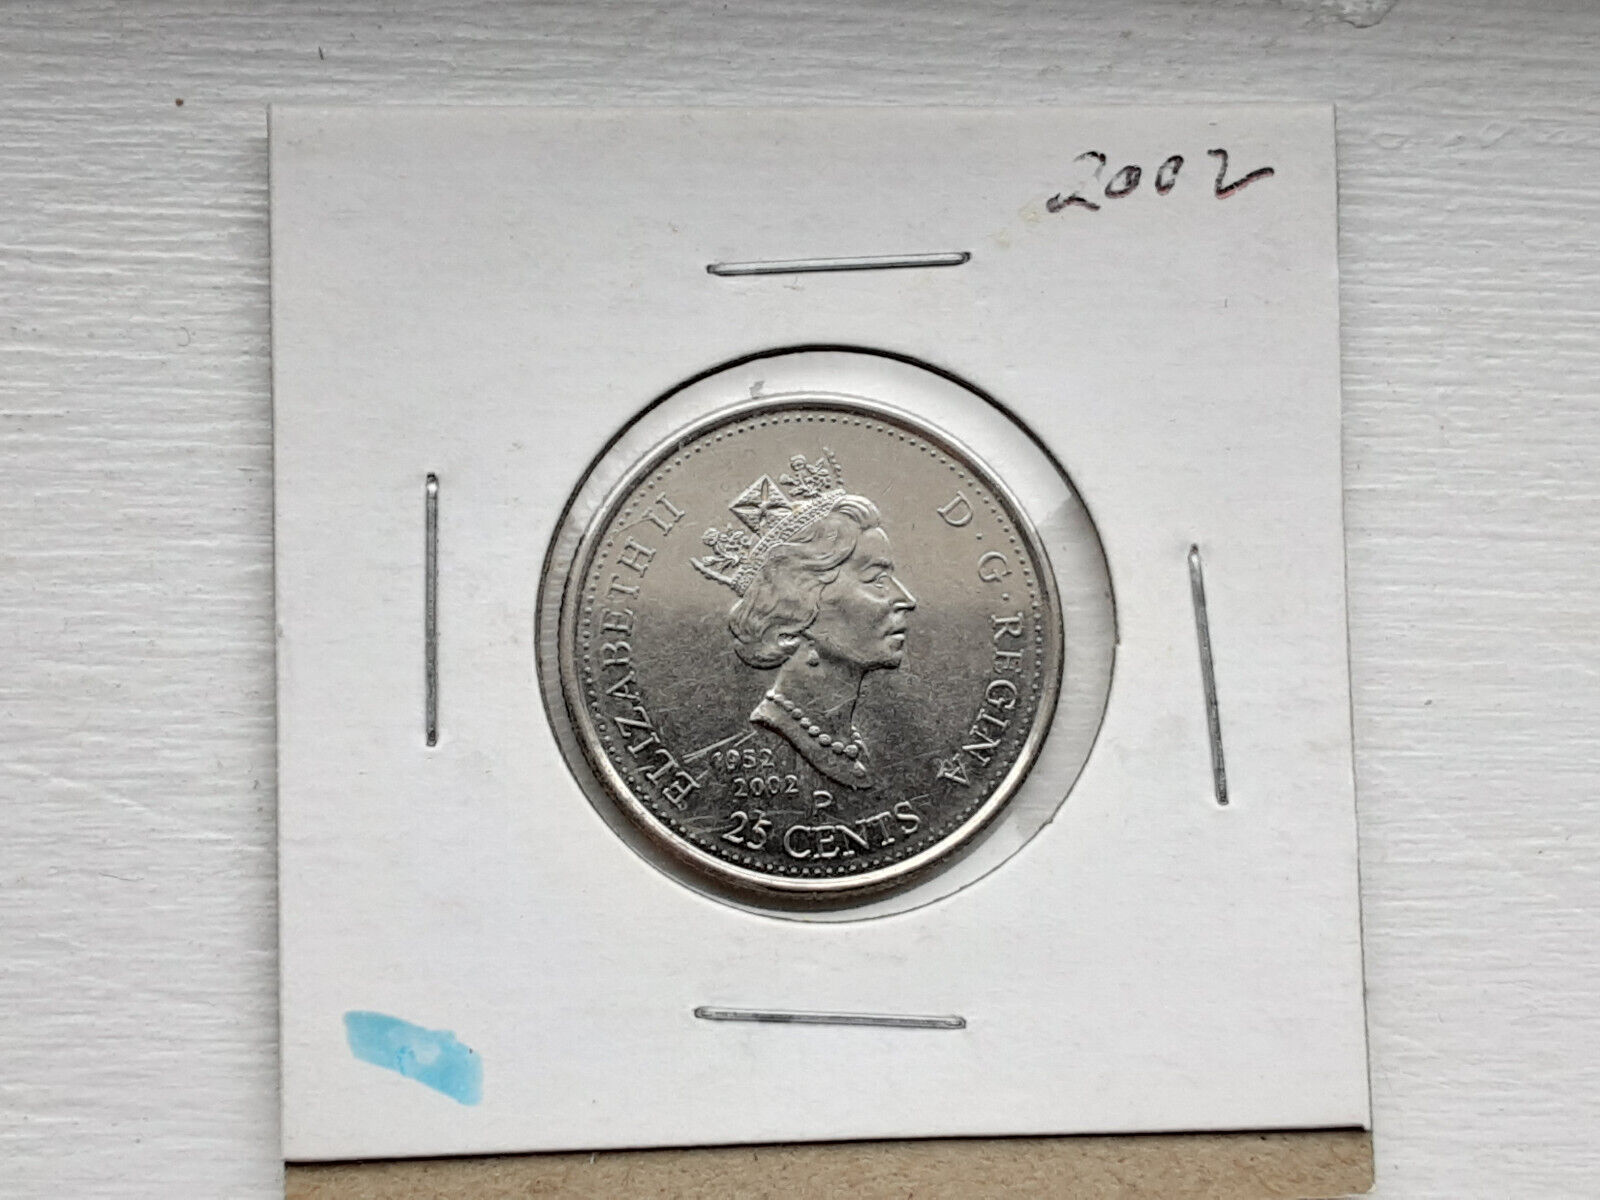 2002p - Canada 25 Cents - Canada Day